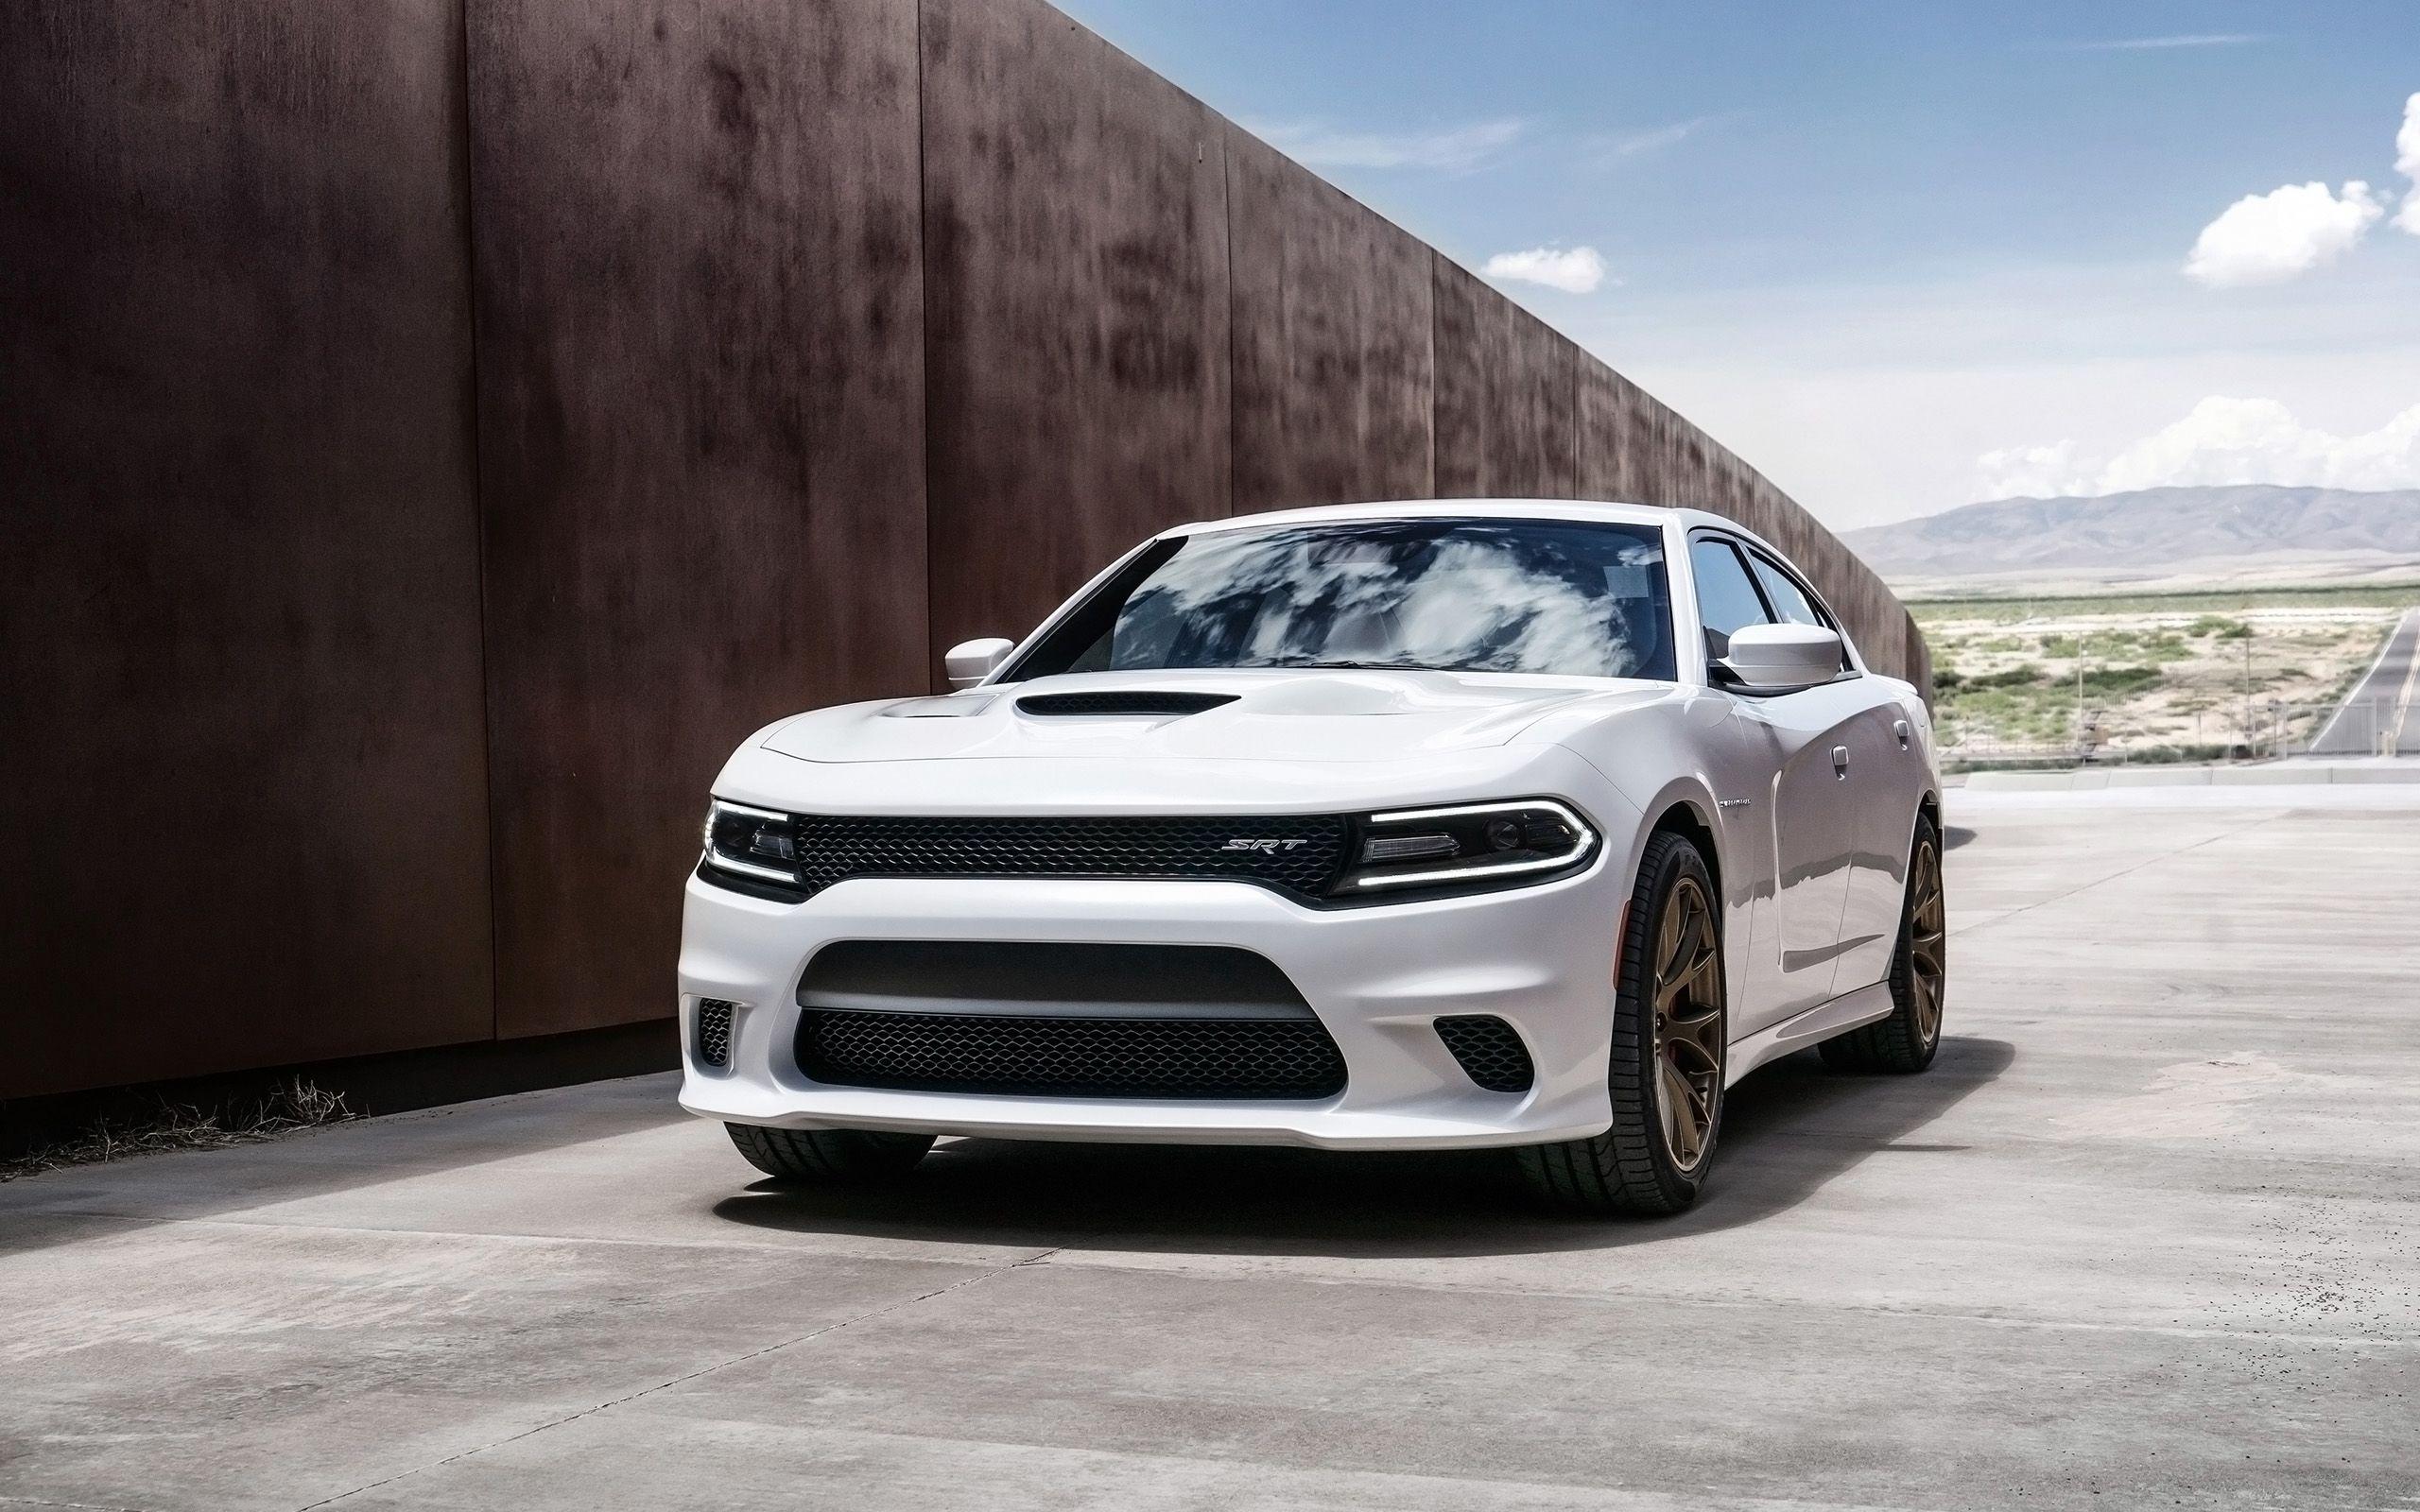 Dodge Charger Hellcat Wallpapers  Wallpaper Cave